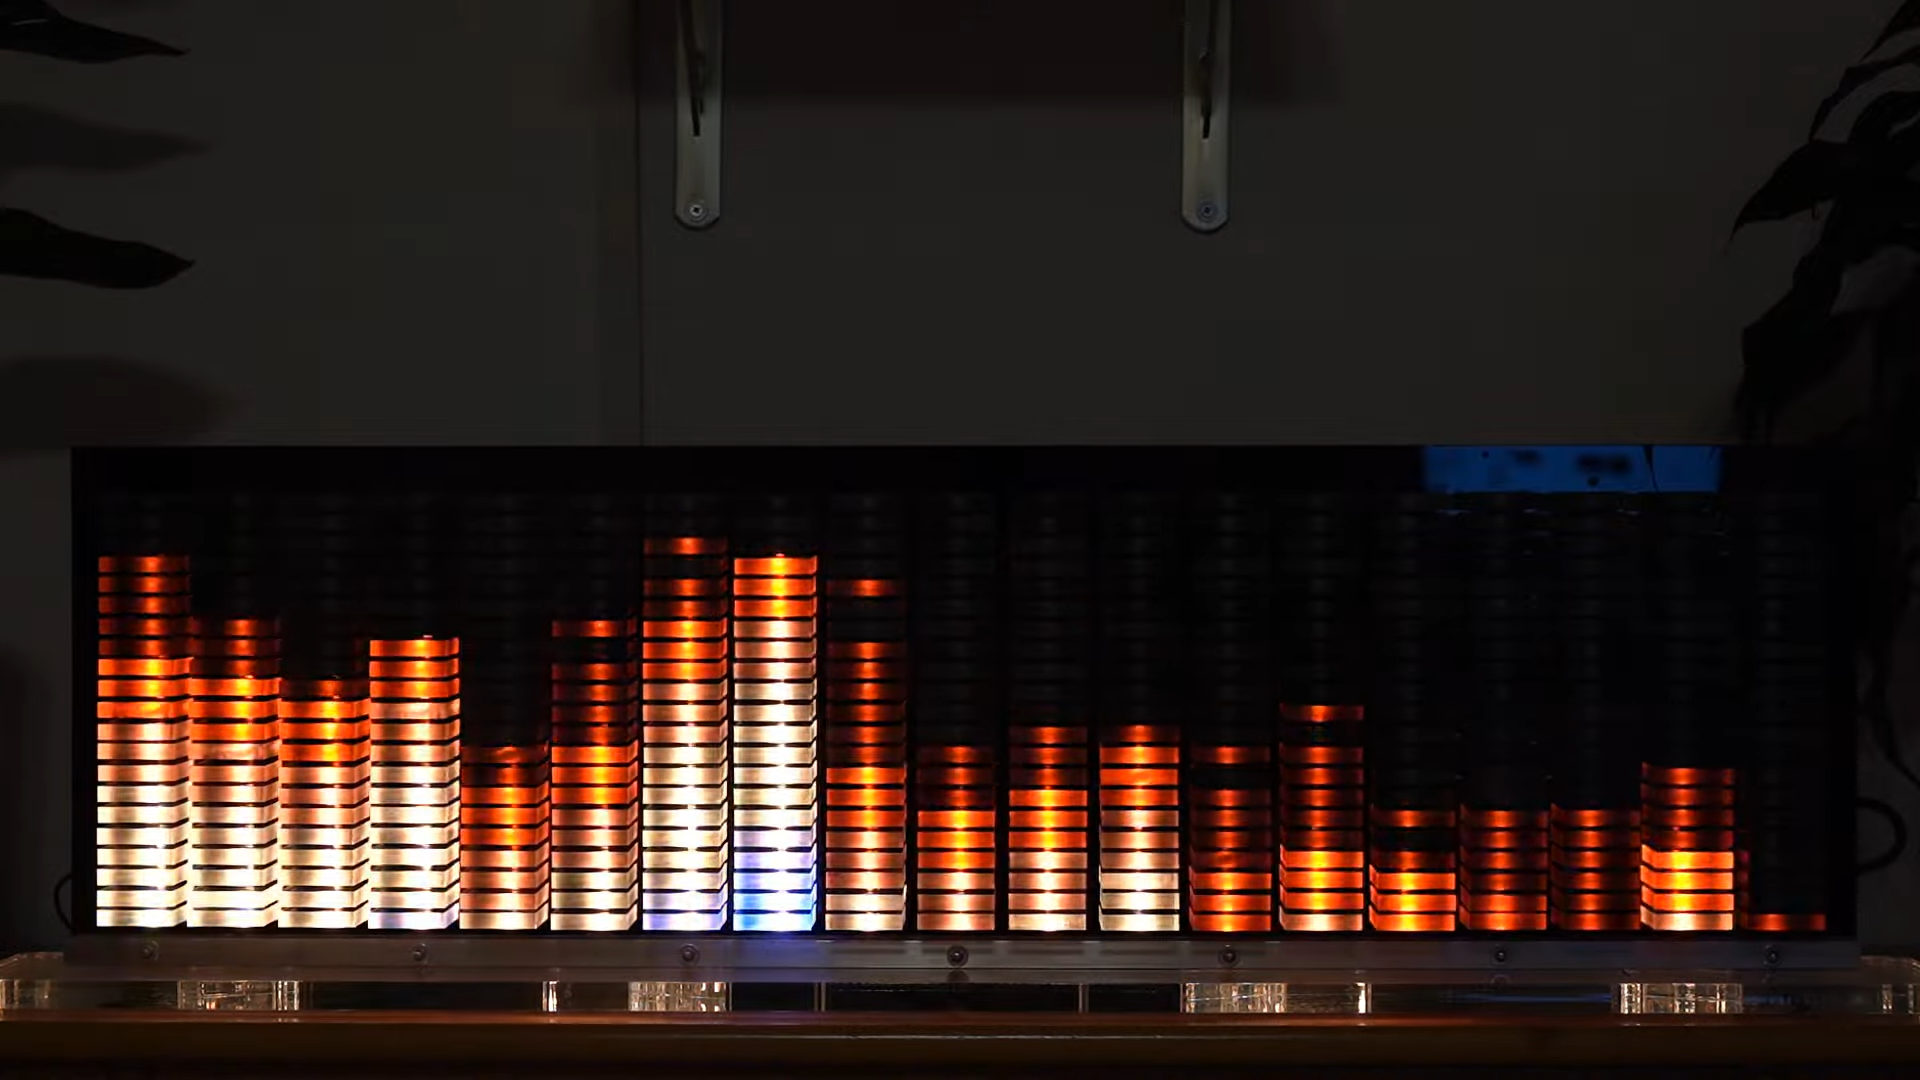 Big Audio Visualizer Pumps With The Music